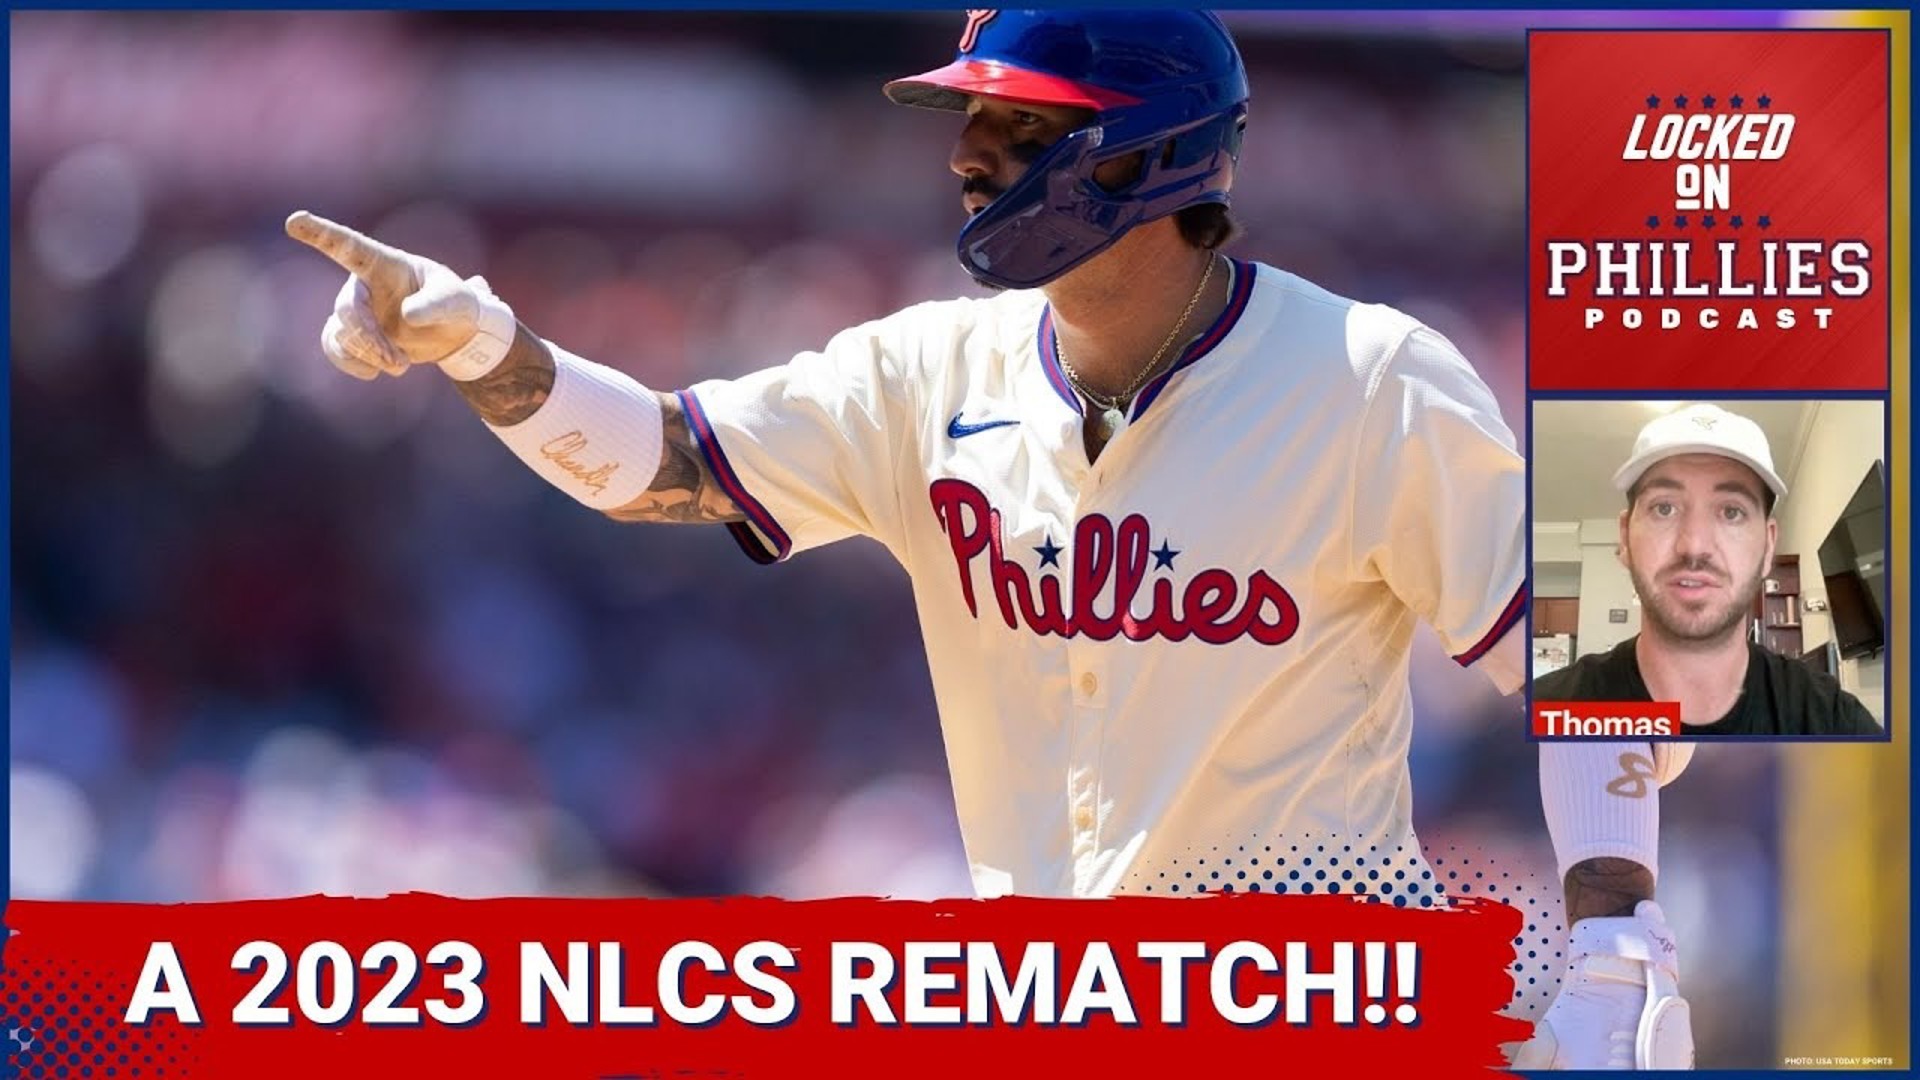 In today's episode, Connor preps for an NLCS rematch between the Philadelphia Phillies and the Arizona Diamondbacks.